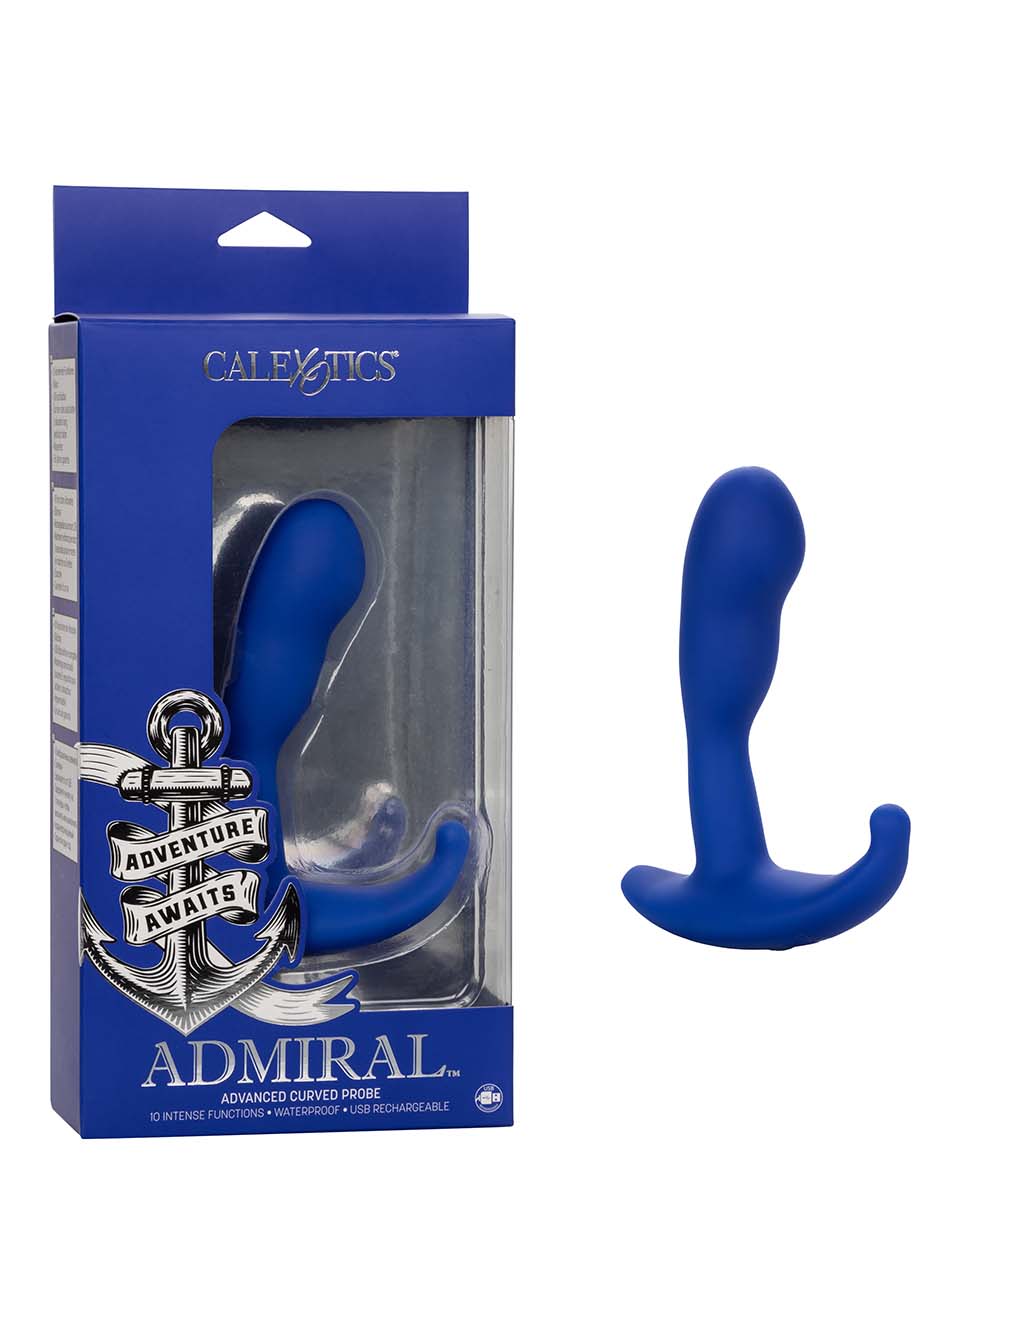 Admiral Advanced Curved Probe- with box